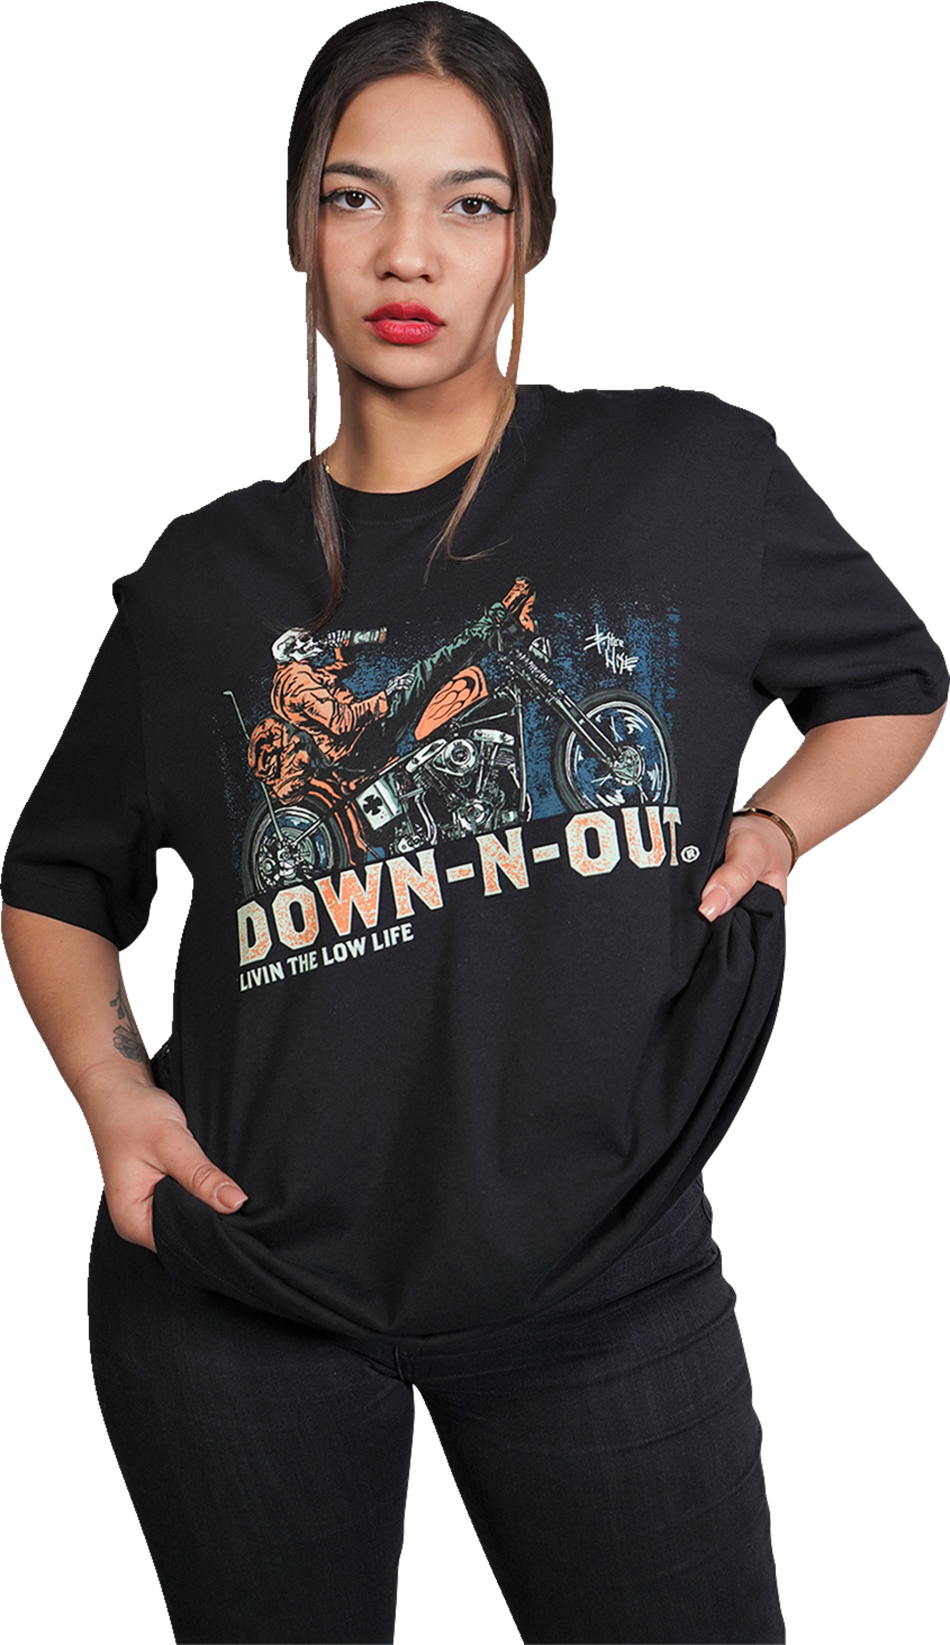 LETHAL THREAT Down-N-Out Party First Safety Second - Black - 2XL DT10043XXL